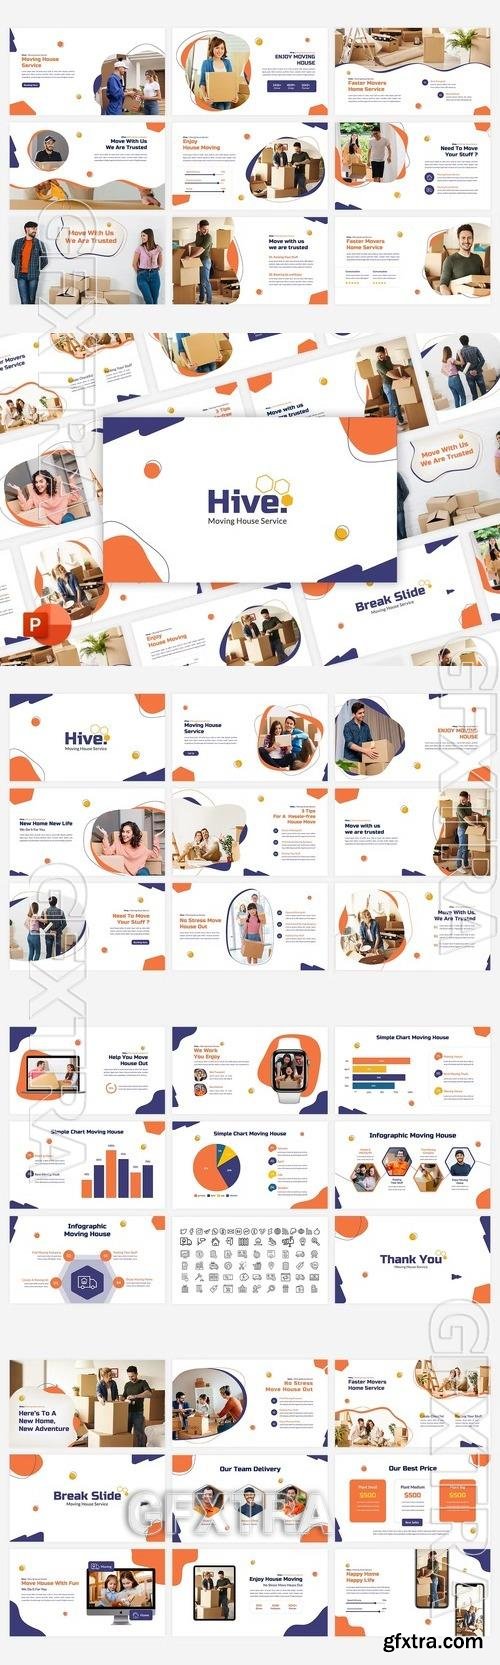 Hive - Moving House Service PowerPoint Template LCBUHGC